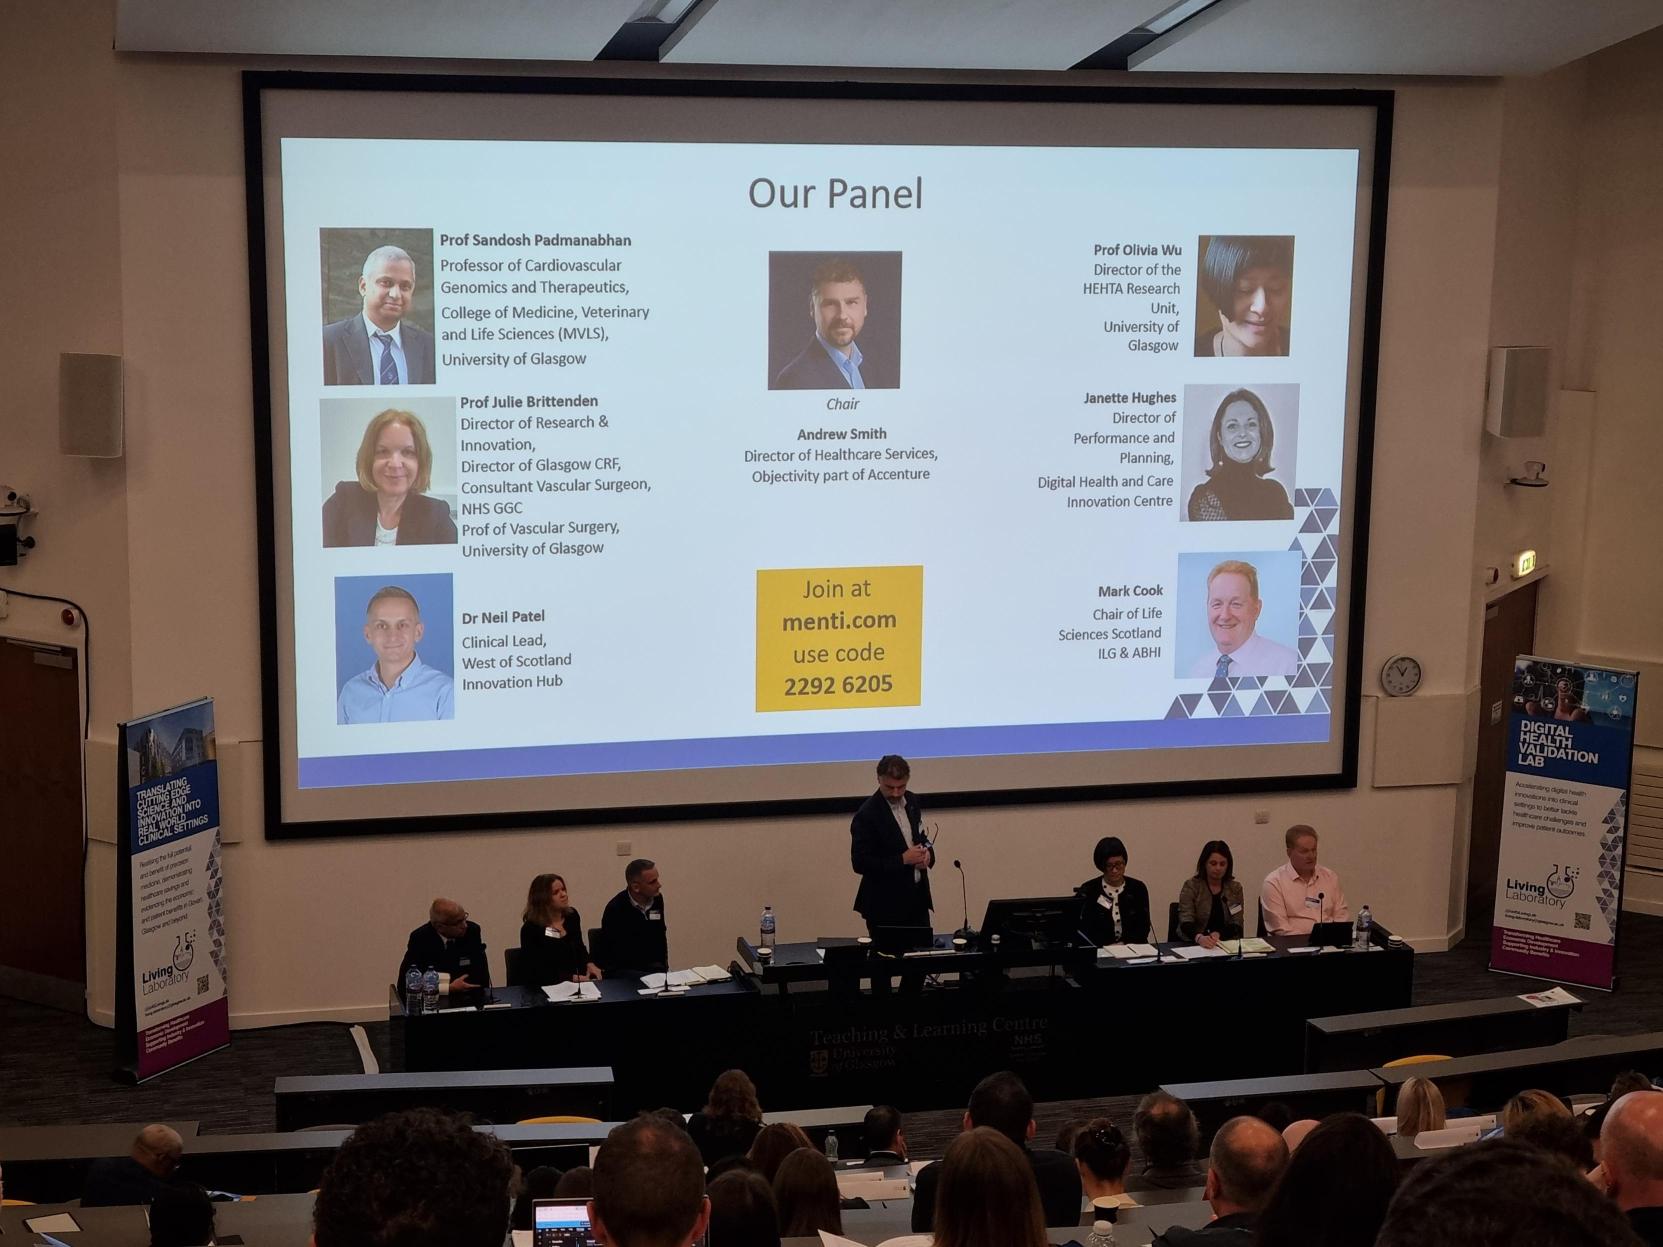 Panel discussion including Prof Sandosh Padmanabhan, Prof Julie Brittenden, Dr Neil Patel, Prof Olivia Wu, Janette Hughes, Mark Cook chaired by Andy Smith